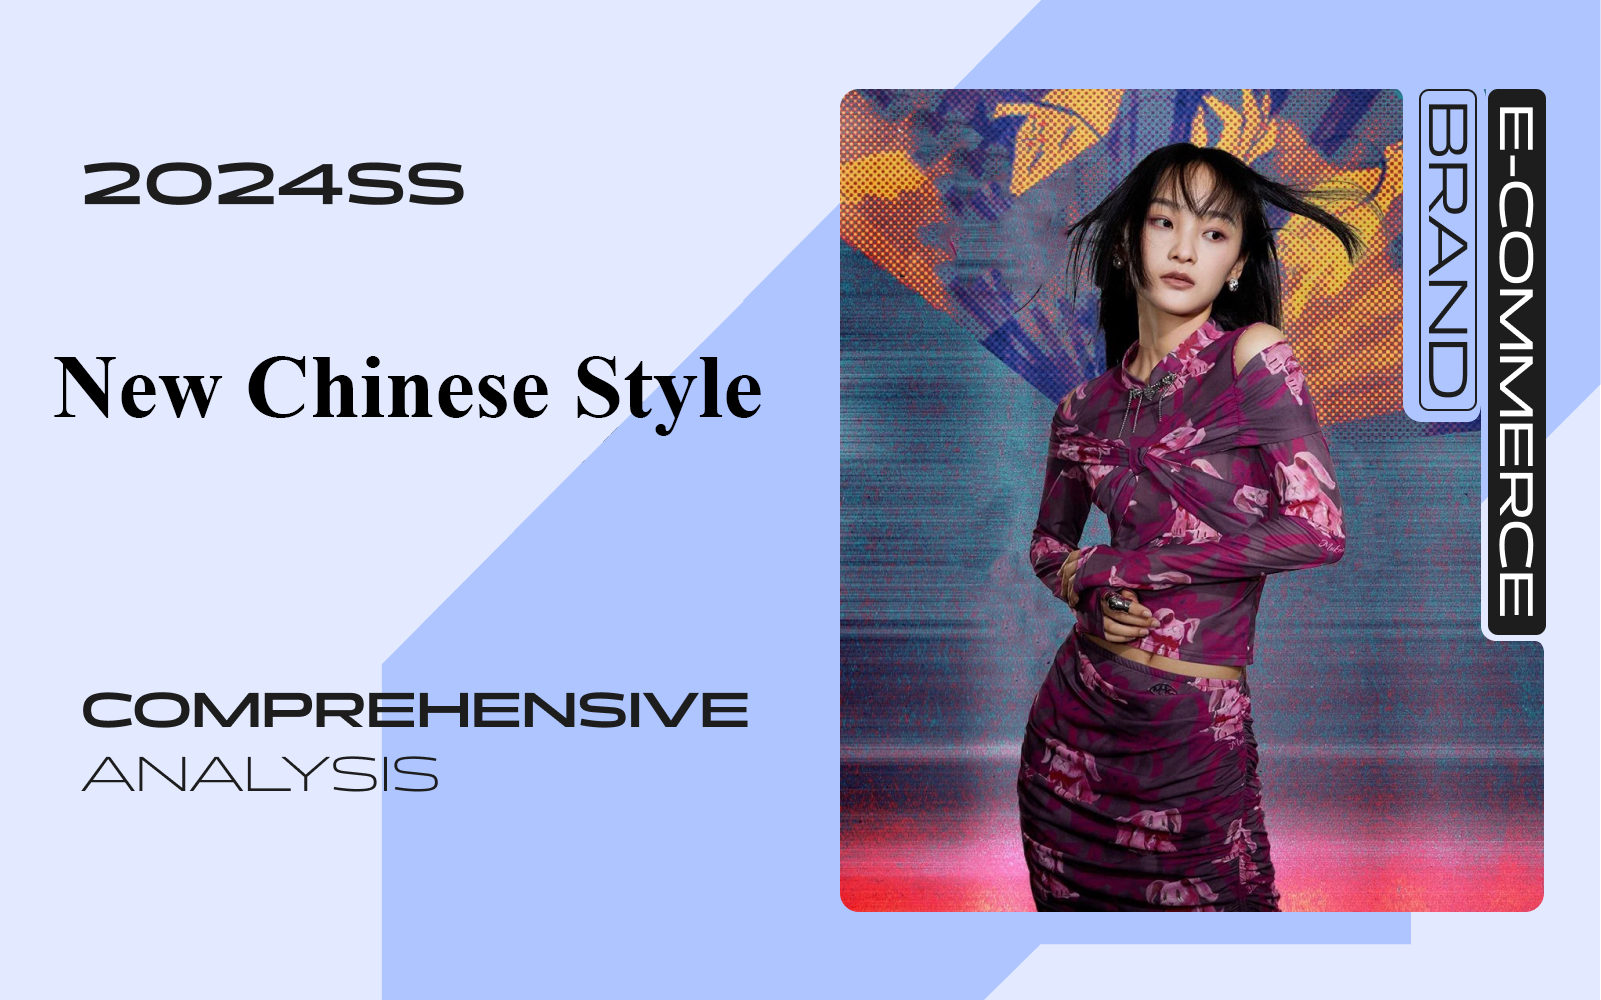 Girls New Chinese Style -- The Popular Style of Womenswear E-Commerce Brand